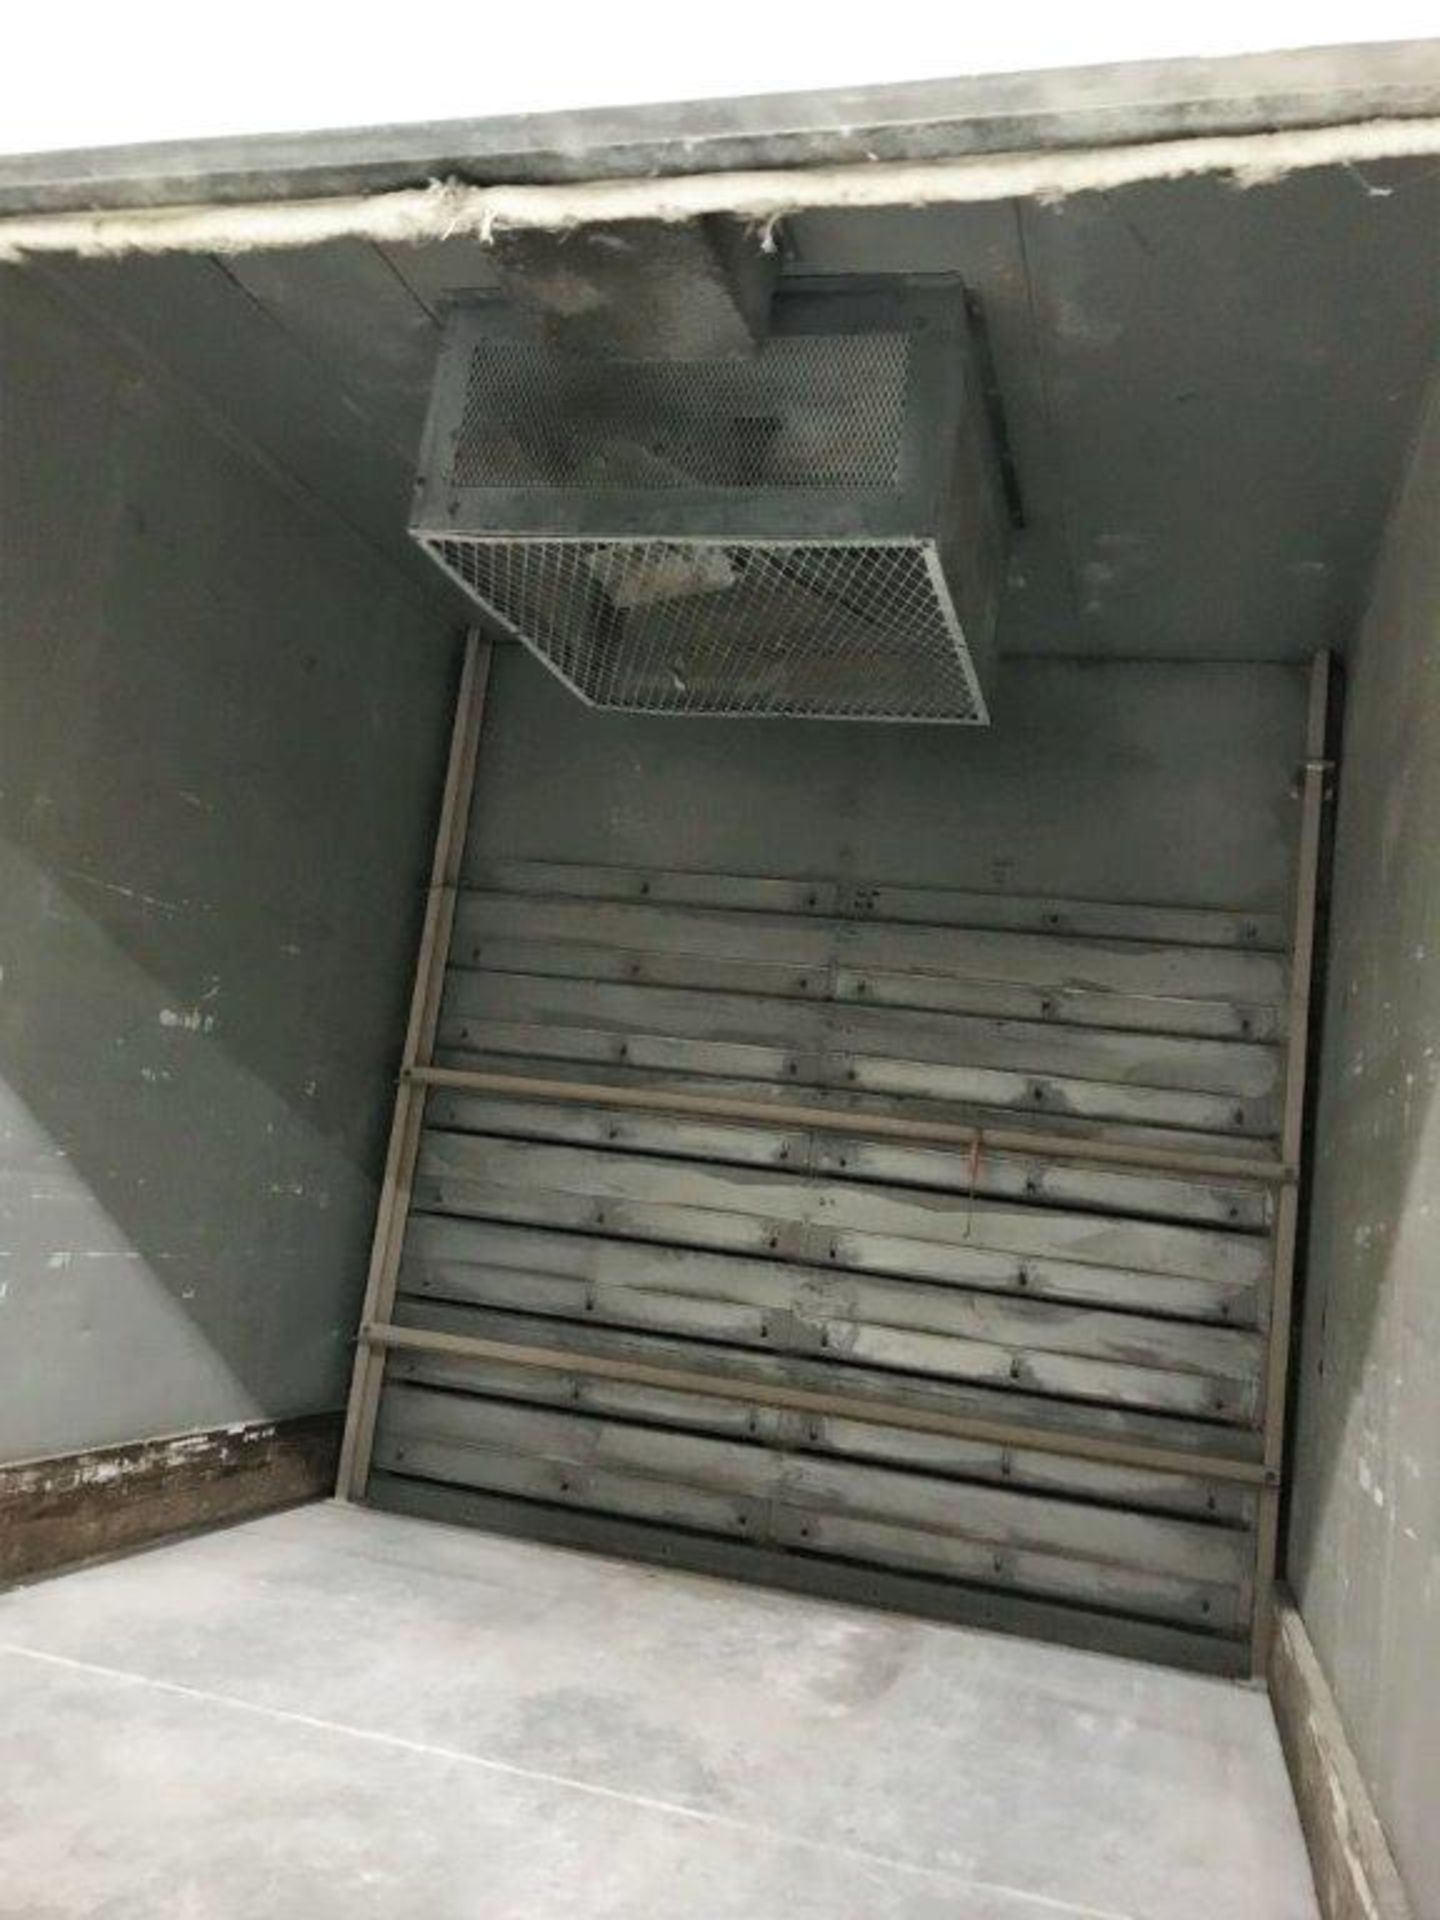 Air & Energy Systems Drying Oven - Image 2 of 3